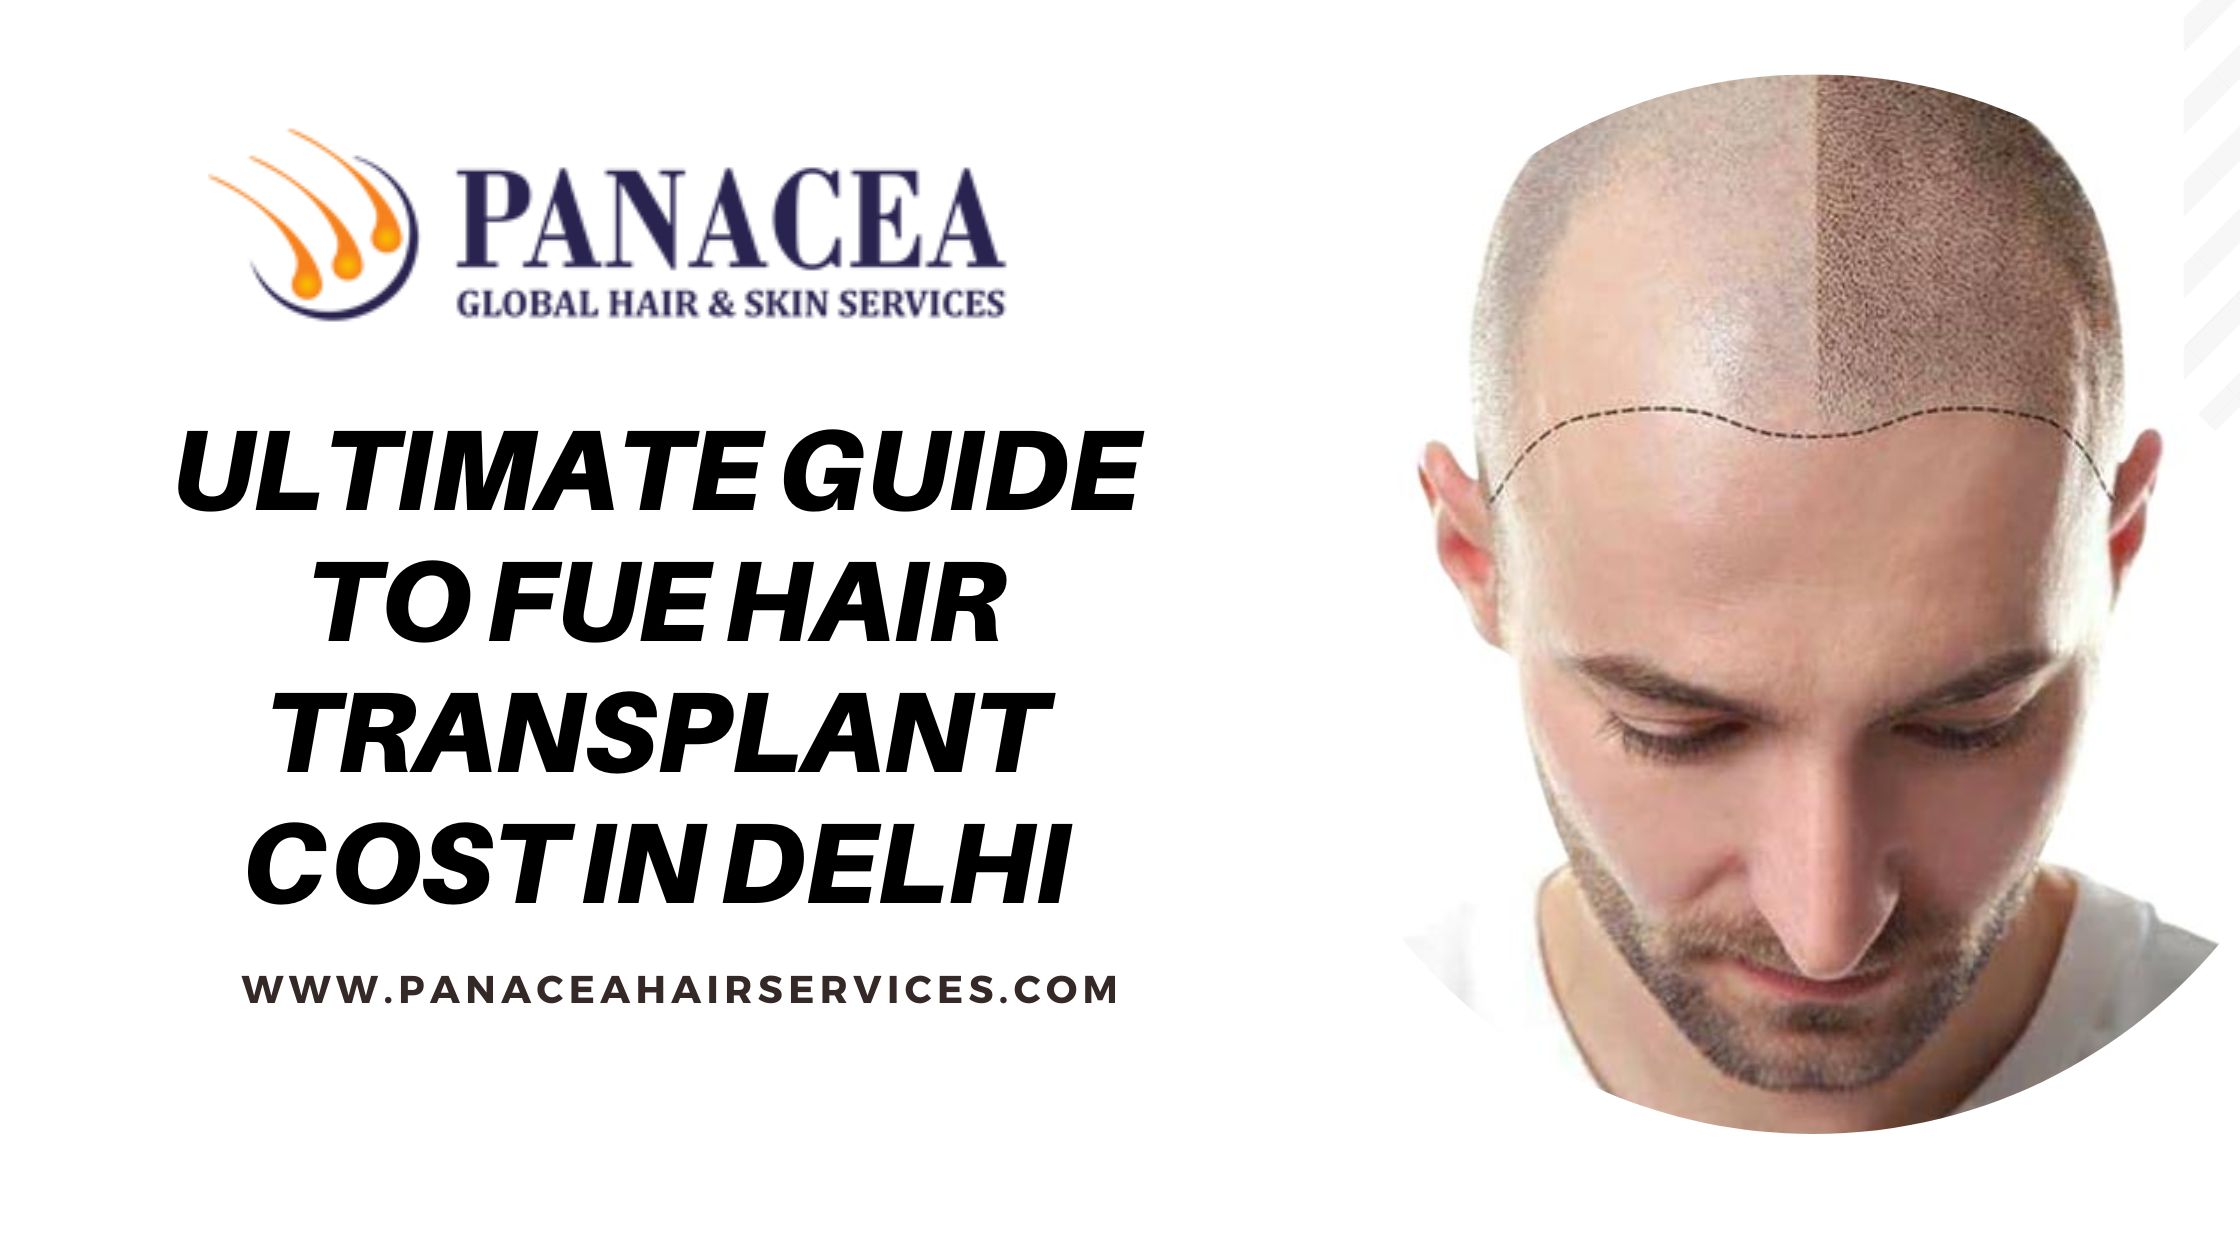 The Ultimate Guide to FUE Hair Transplant Cost in Delhi